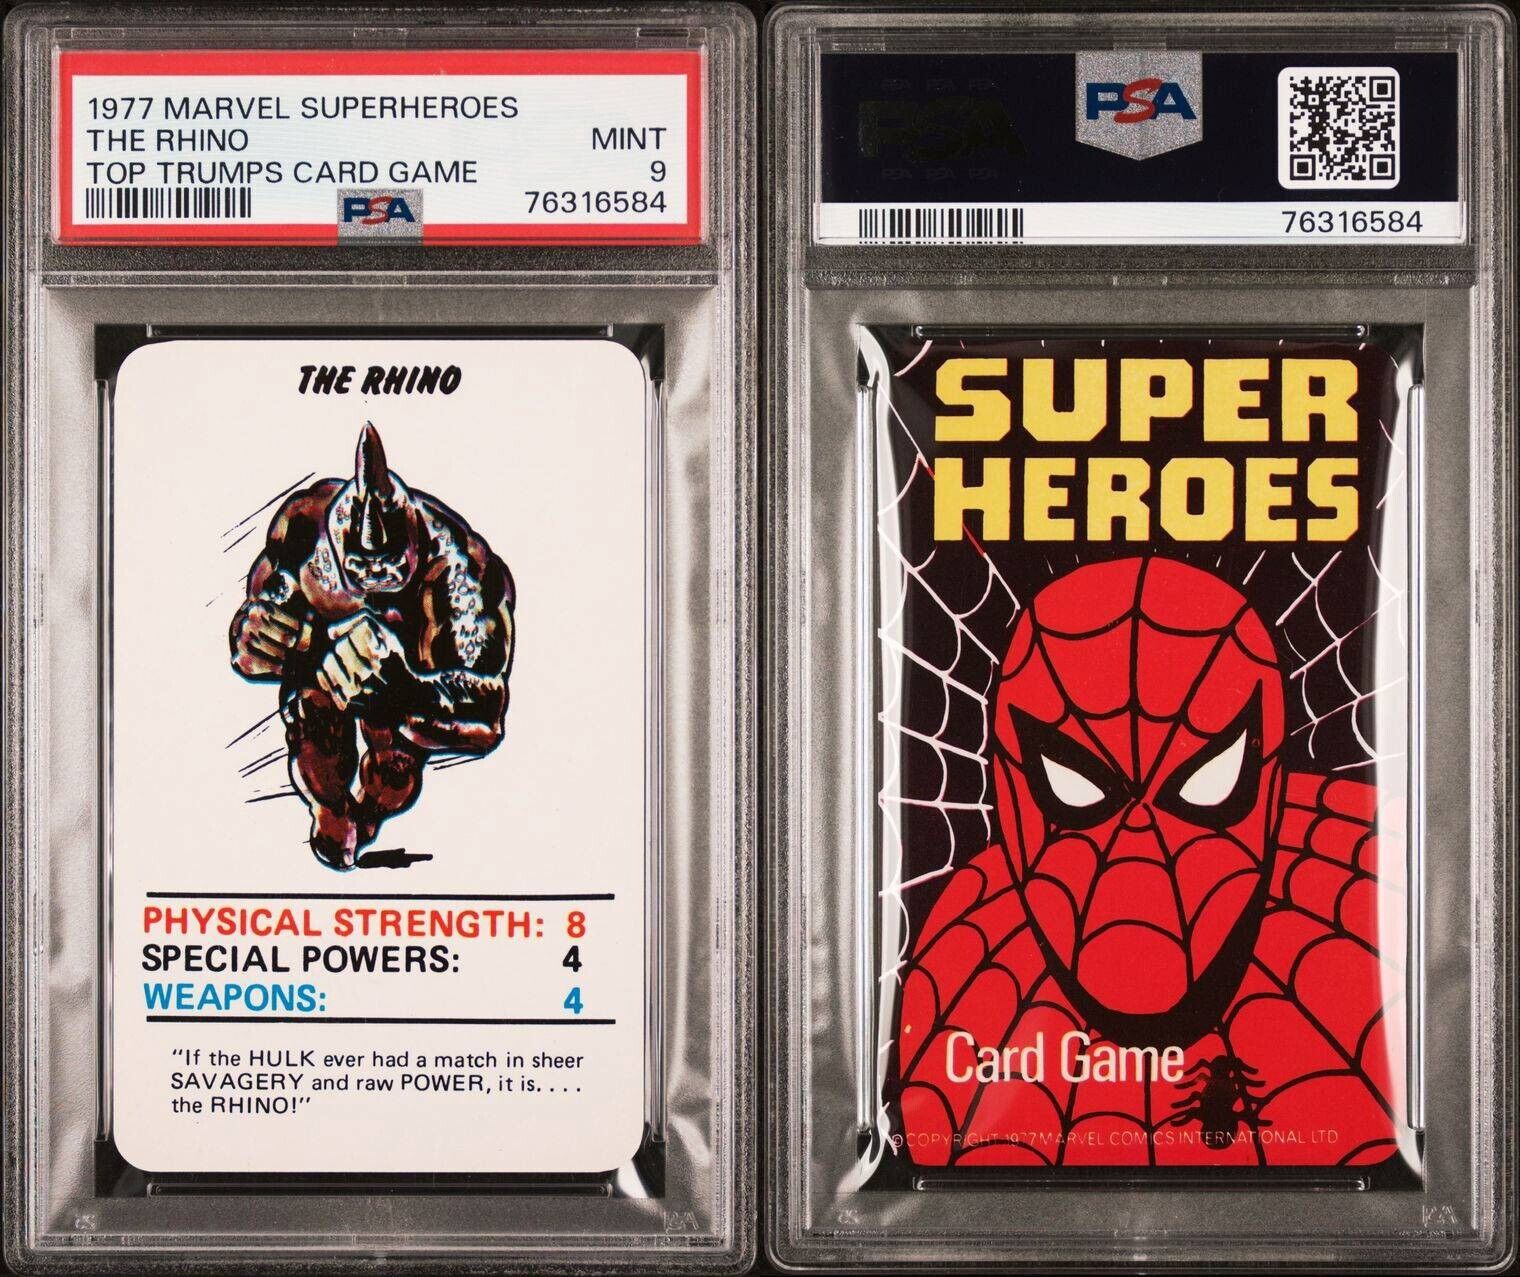 1977 MARVEL SUPERHEROES THE RHINO TOP TRUMPS CARD GAME PSA 9 MINT POP 2 No 10’s